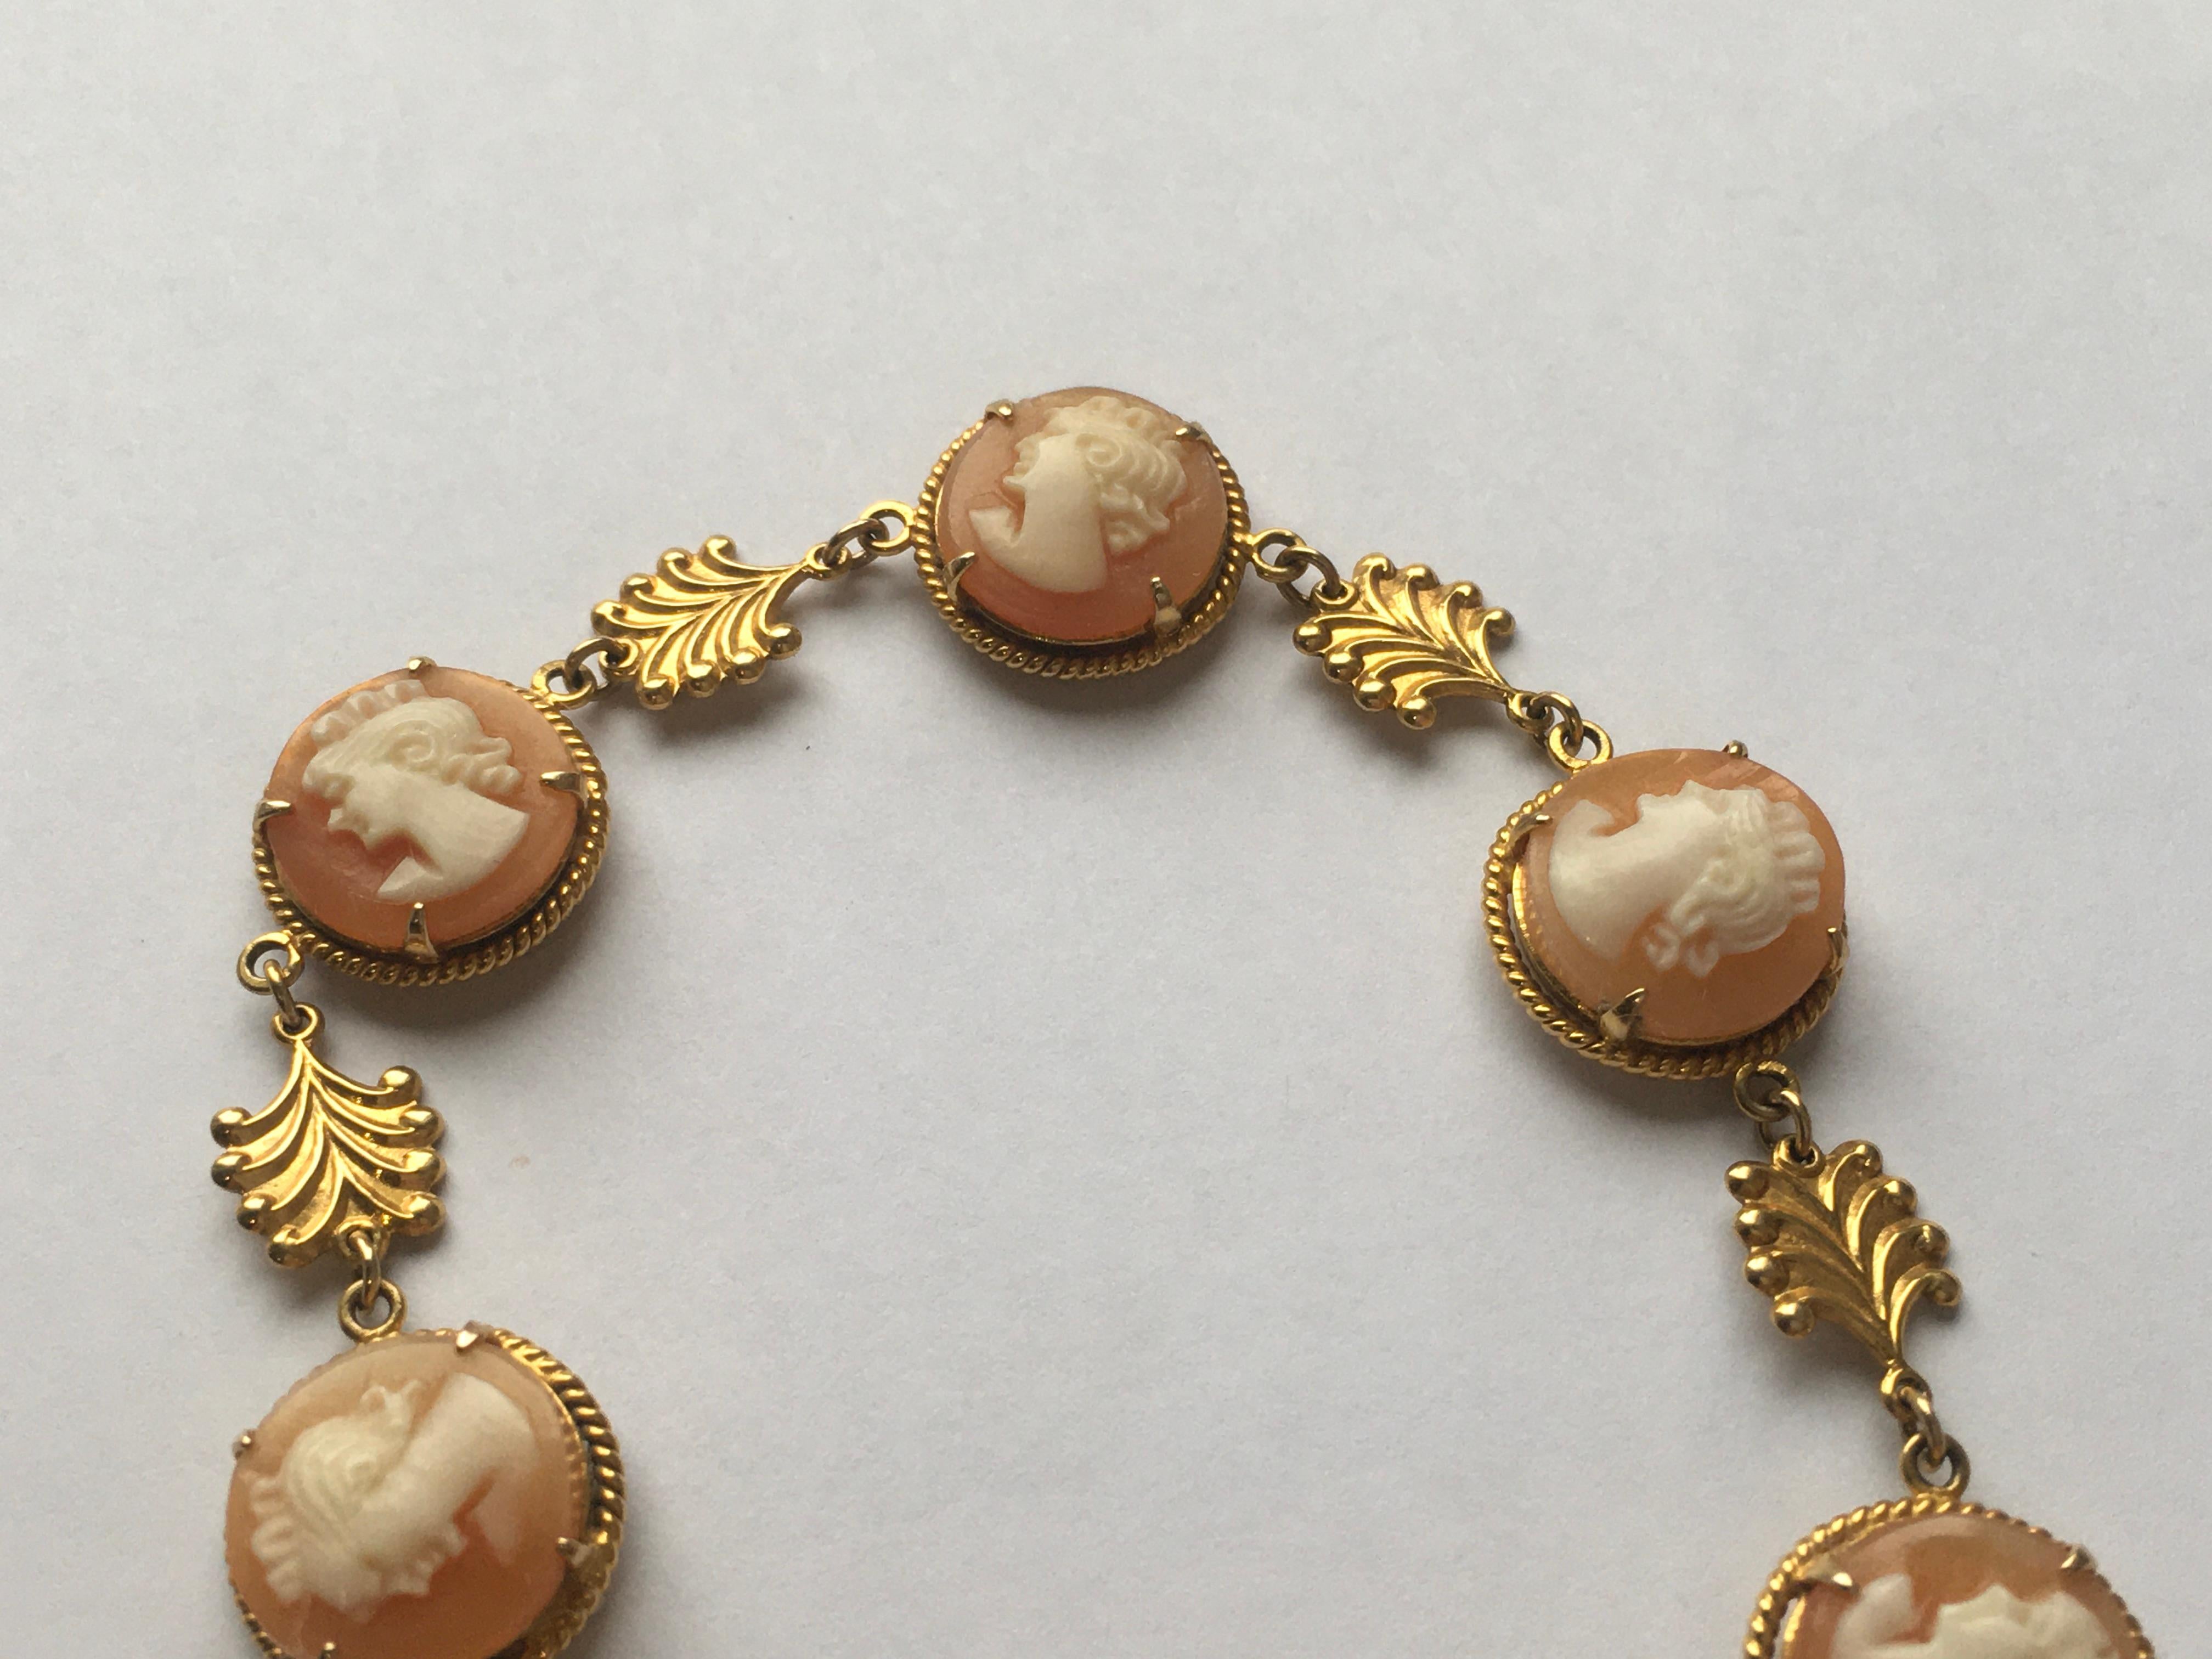 Vintage bracelet set with 6 round cameos with fancy gold divider links.
Approx 7 inches long
With safety chain
Hallmarks Birmingham UK 1965 
In very good condition 
Weight 10.1 grams